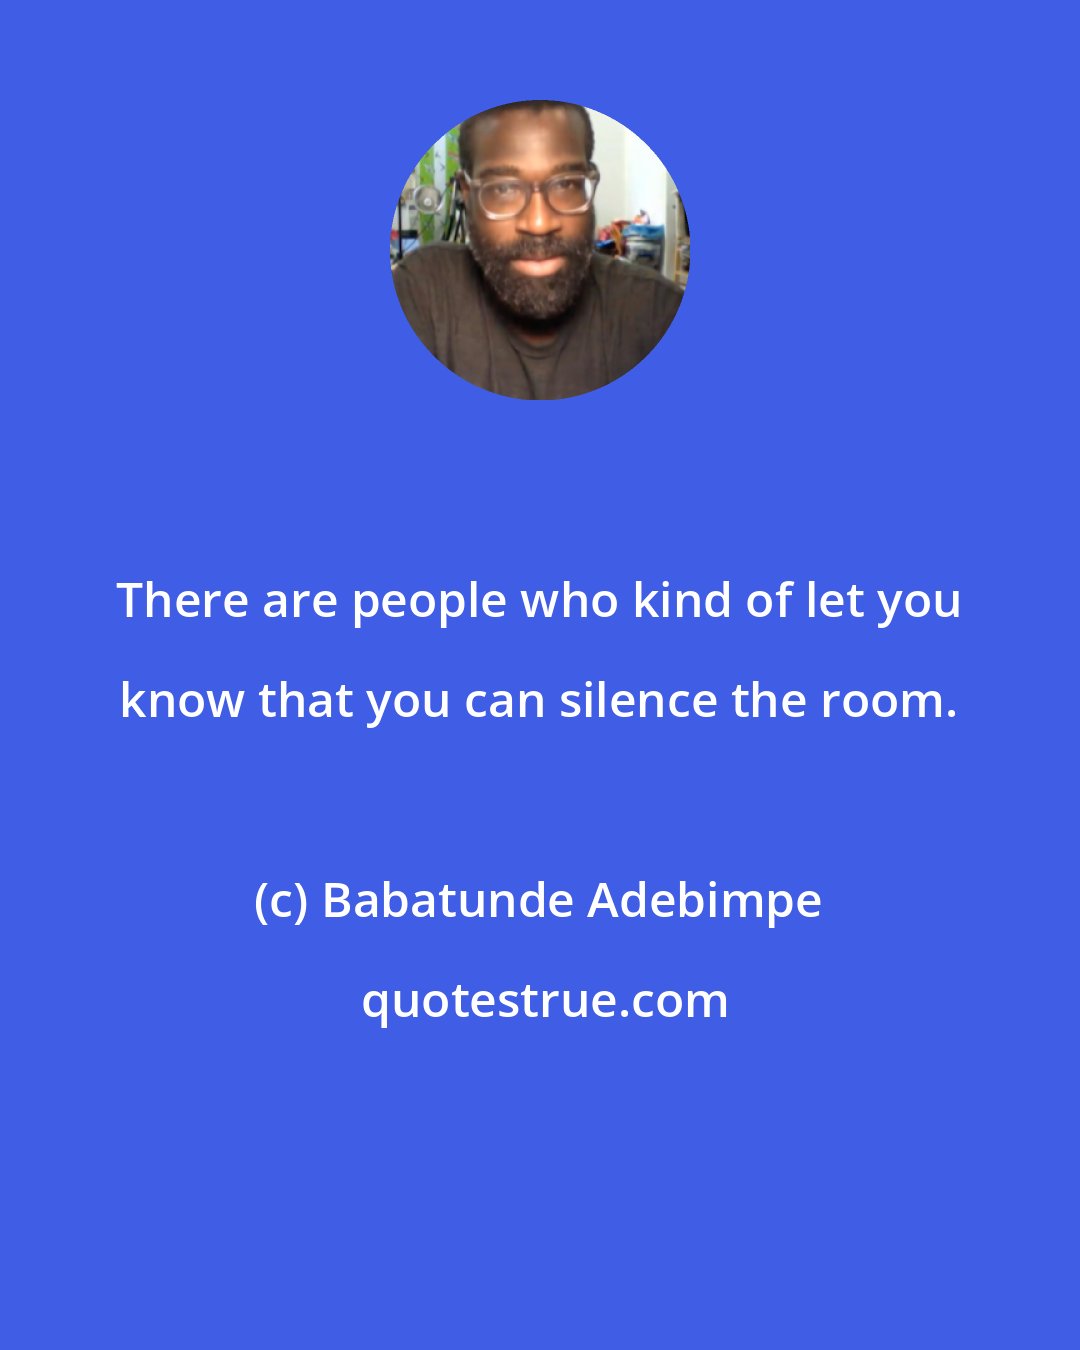 Babatunde Adebimpe: There are people who kind of let you know that you can silence the room.